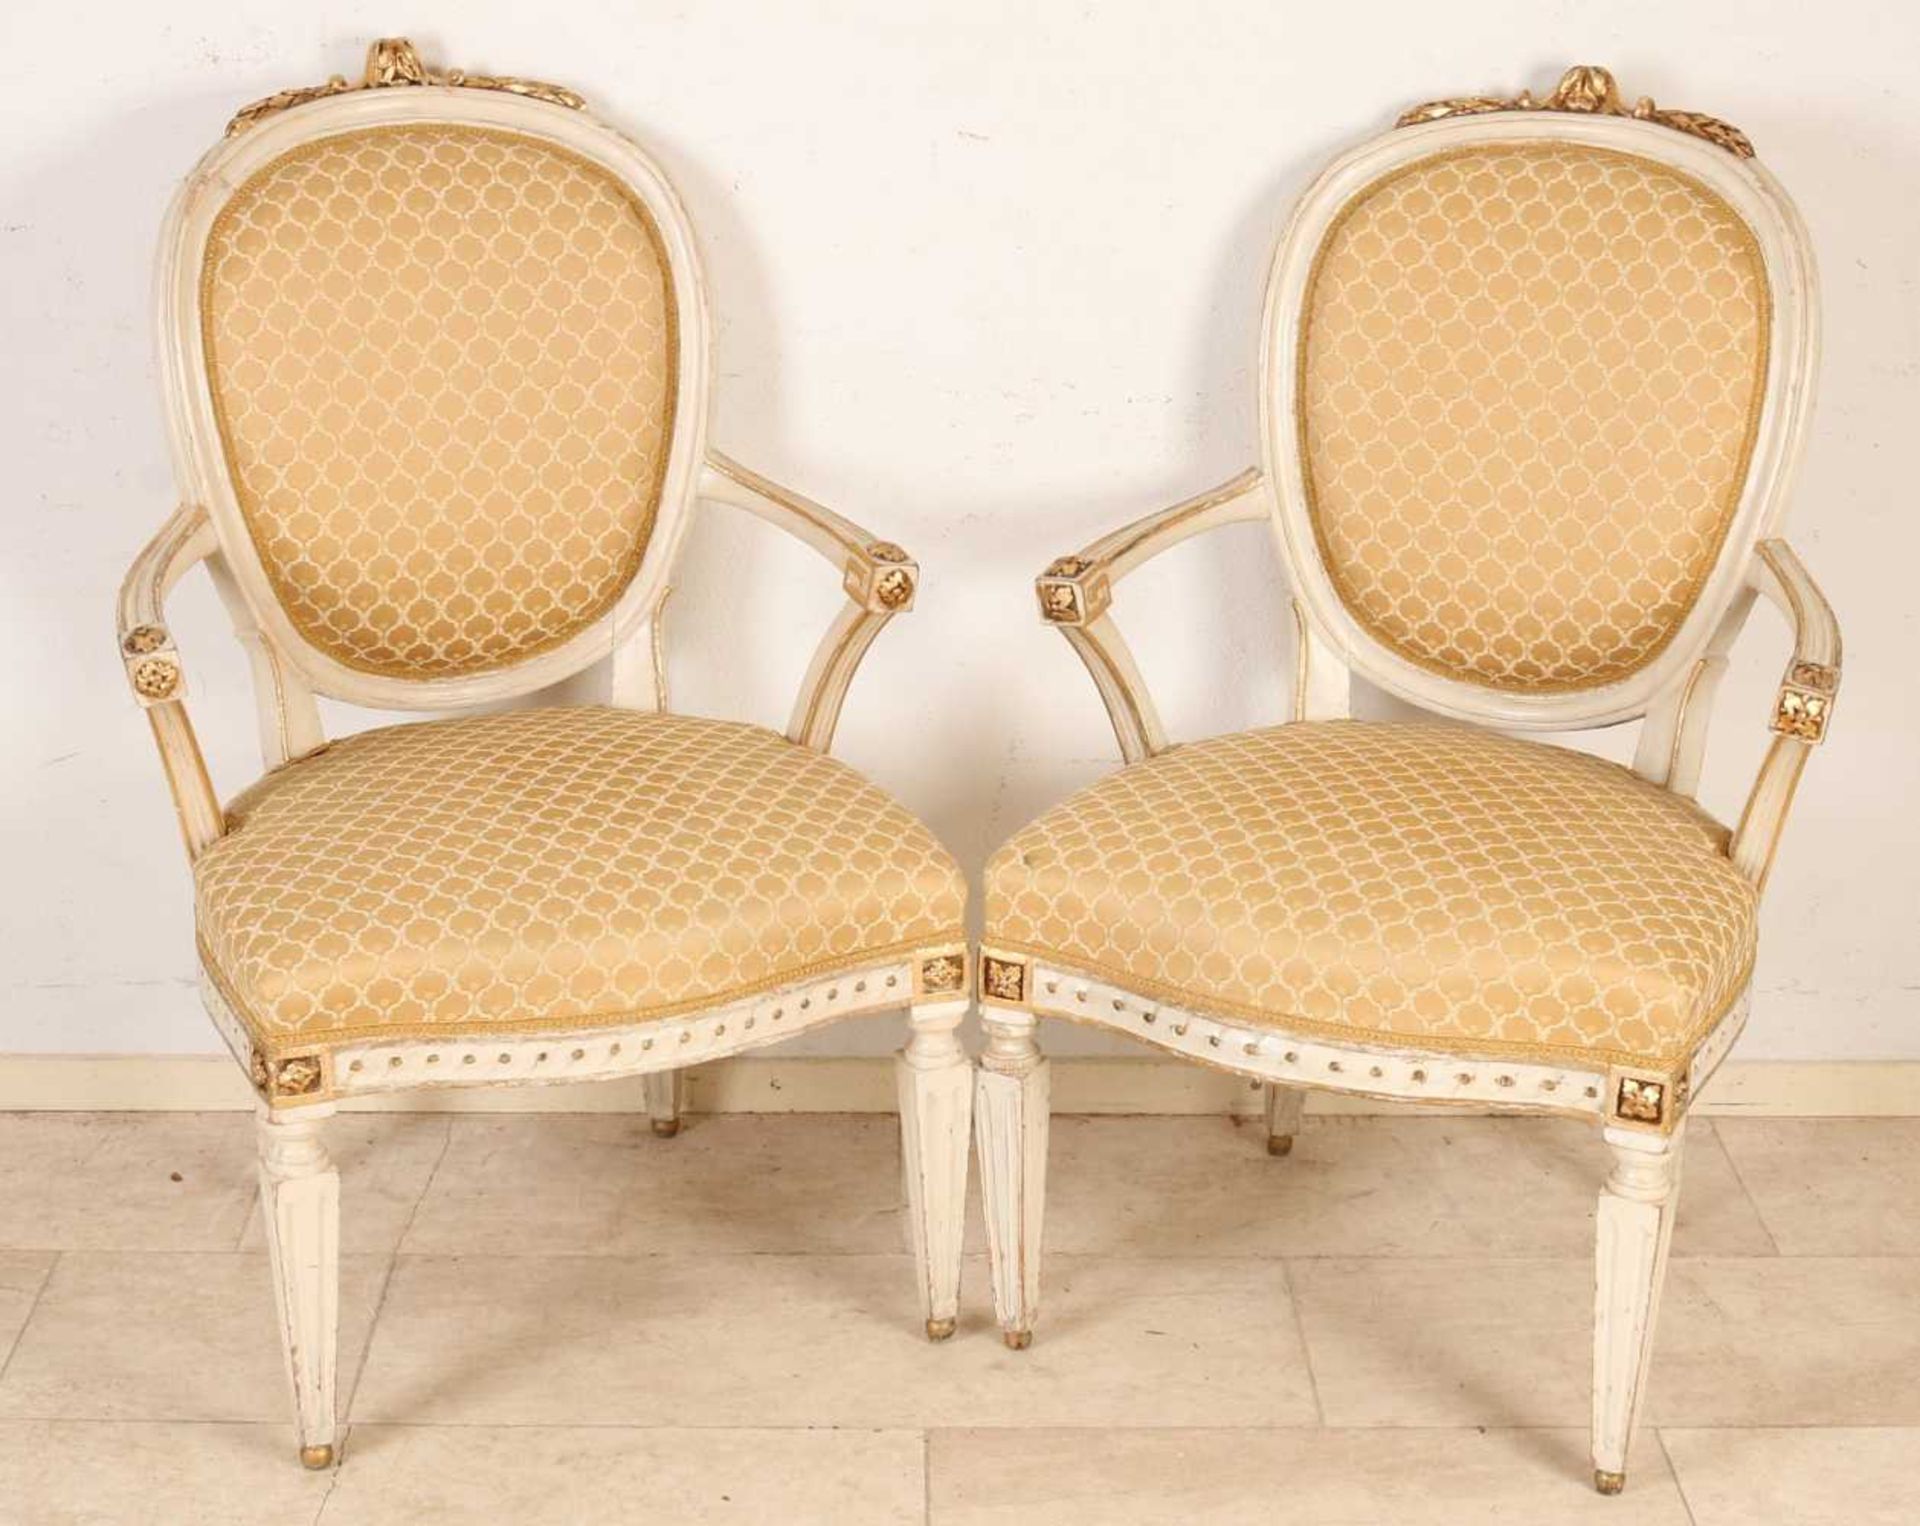 Two 19th century Louis XVI style armchairs with original polychrome and gold leaf. With good